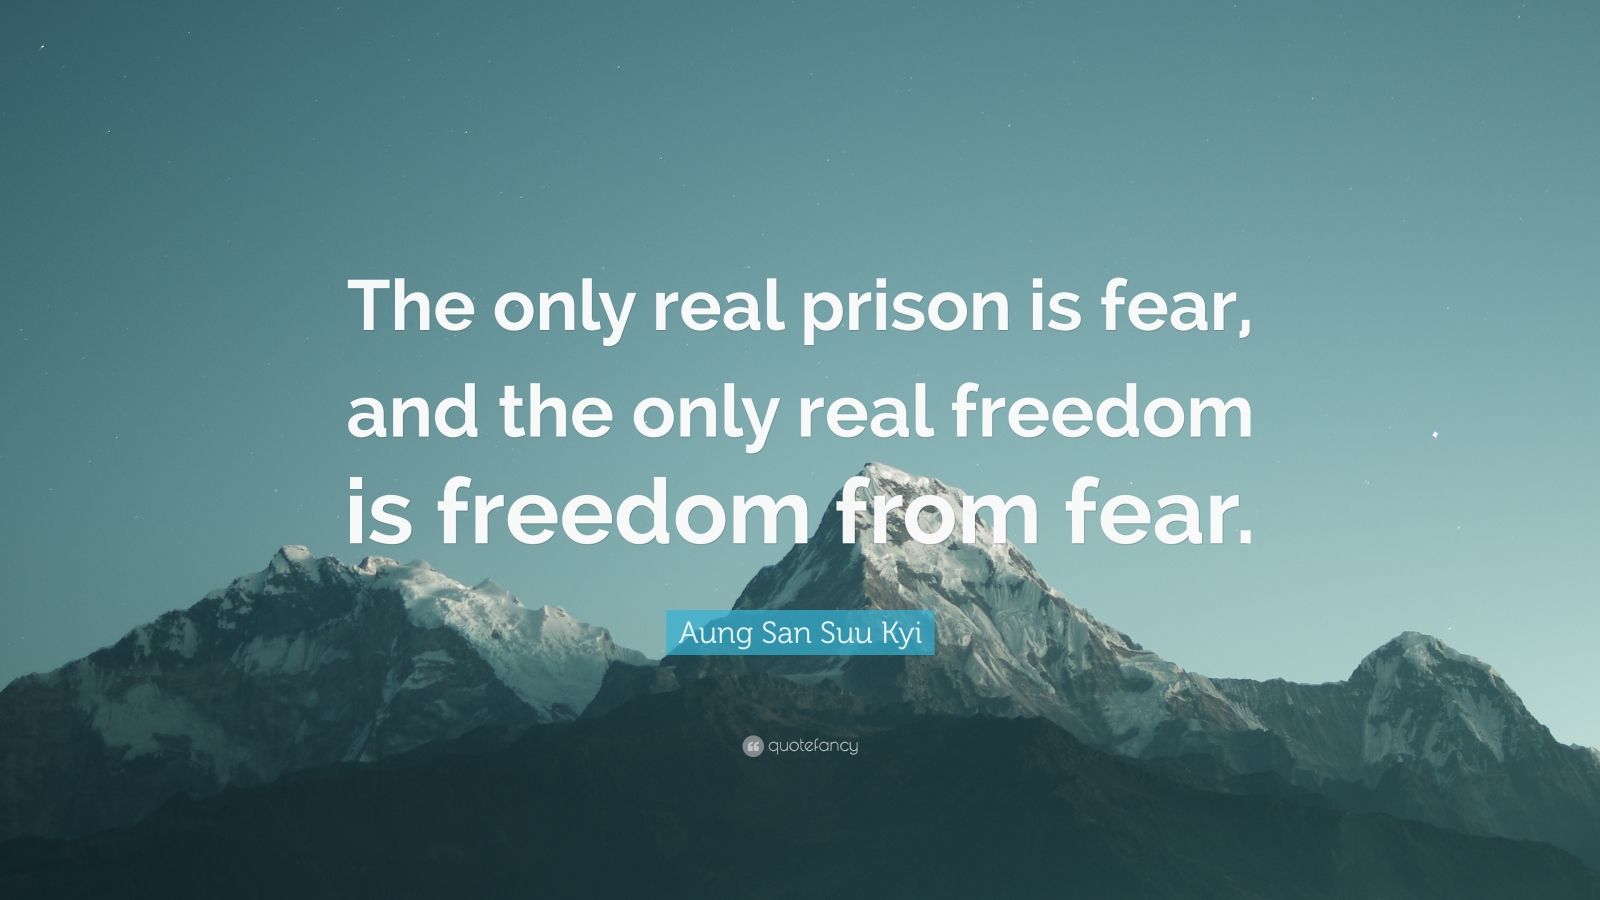 Aung San Suu Kyi Quote: “The only real prison is fear, and the only ...